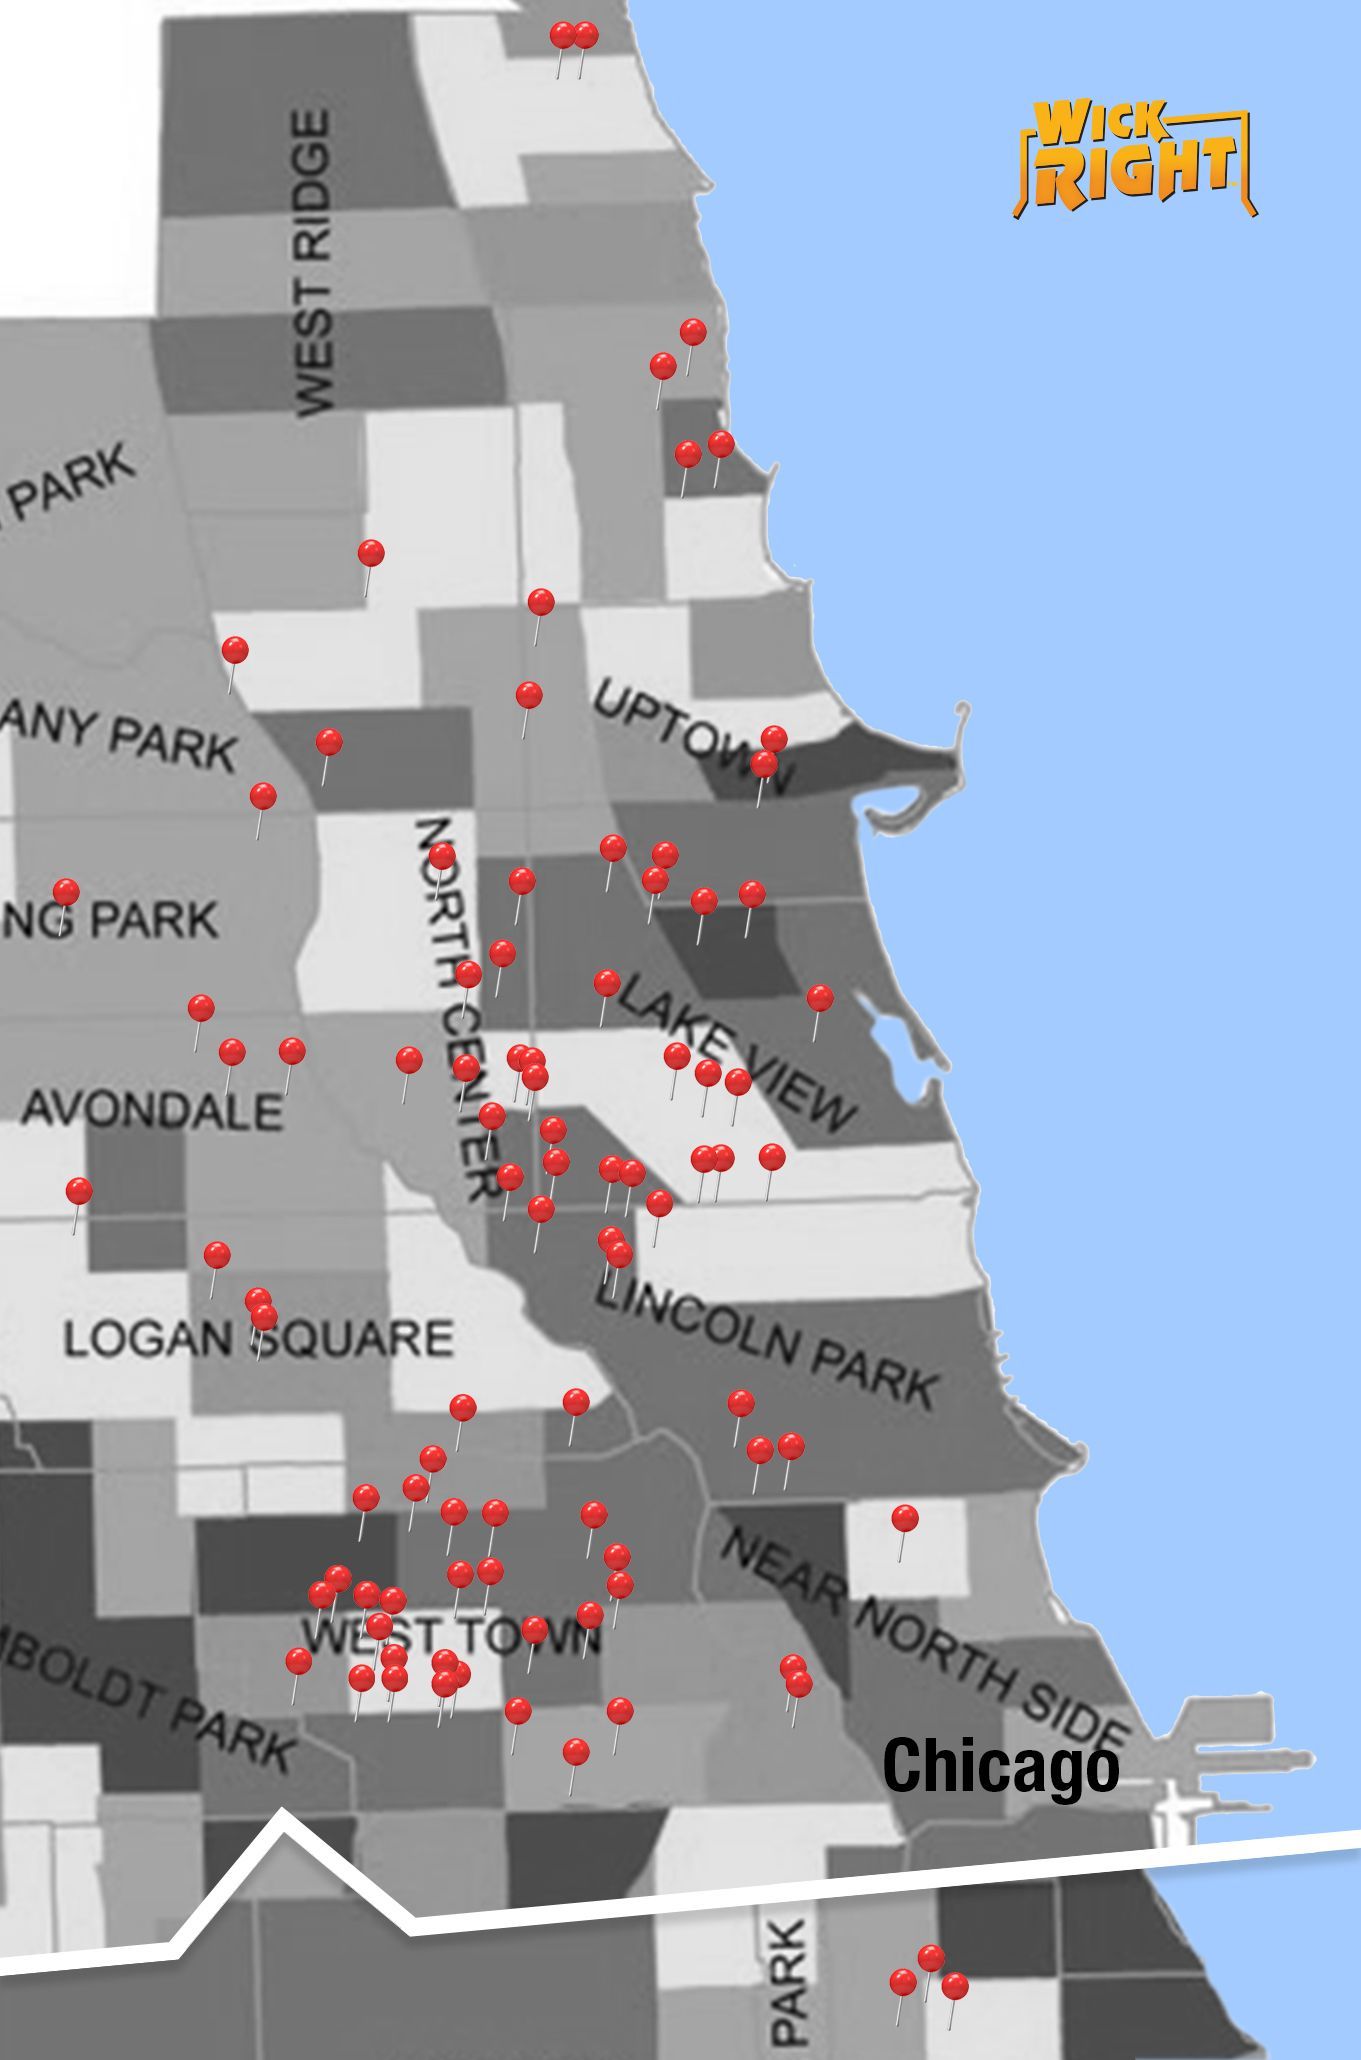 Chicago neighborhood map with red pins indicating WickRight installation and shading indicating asthma cases